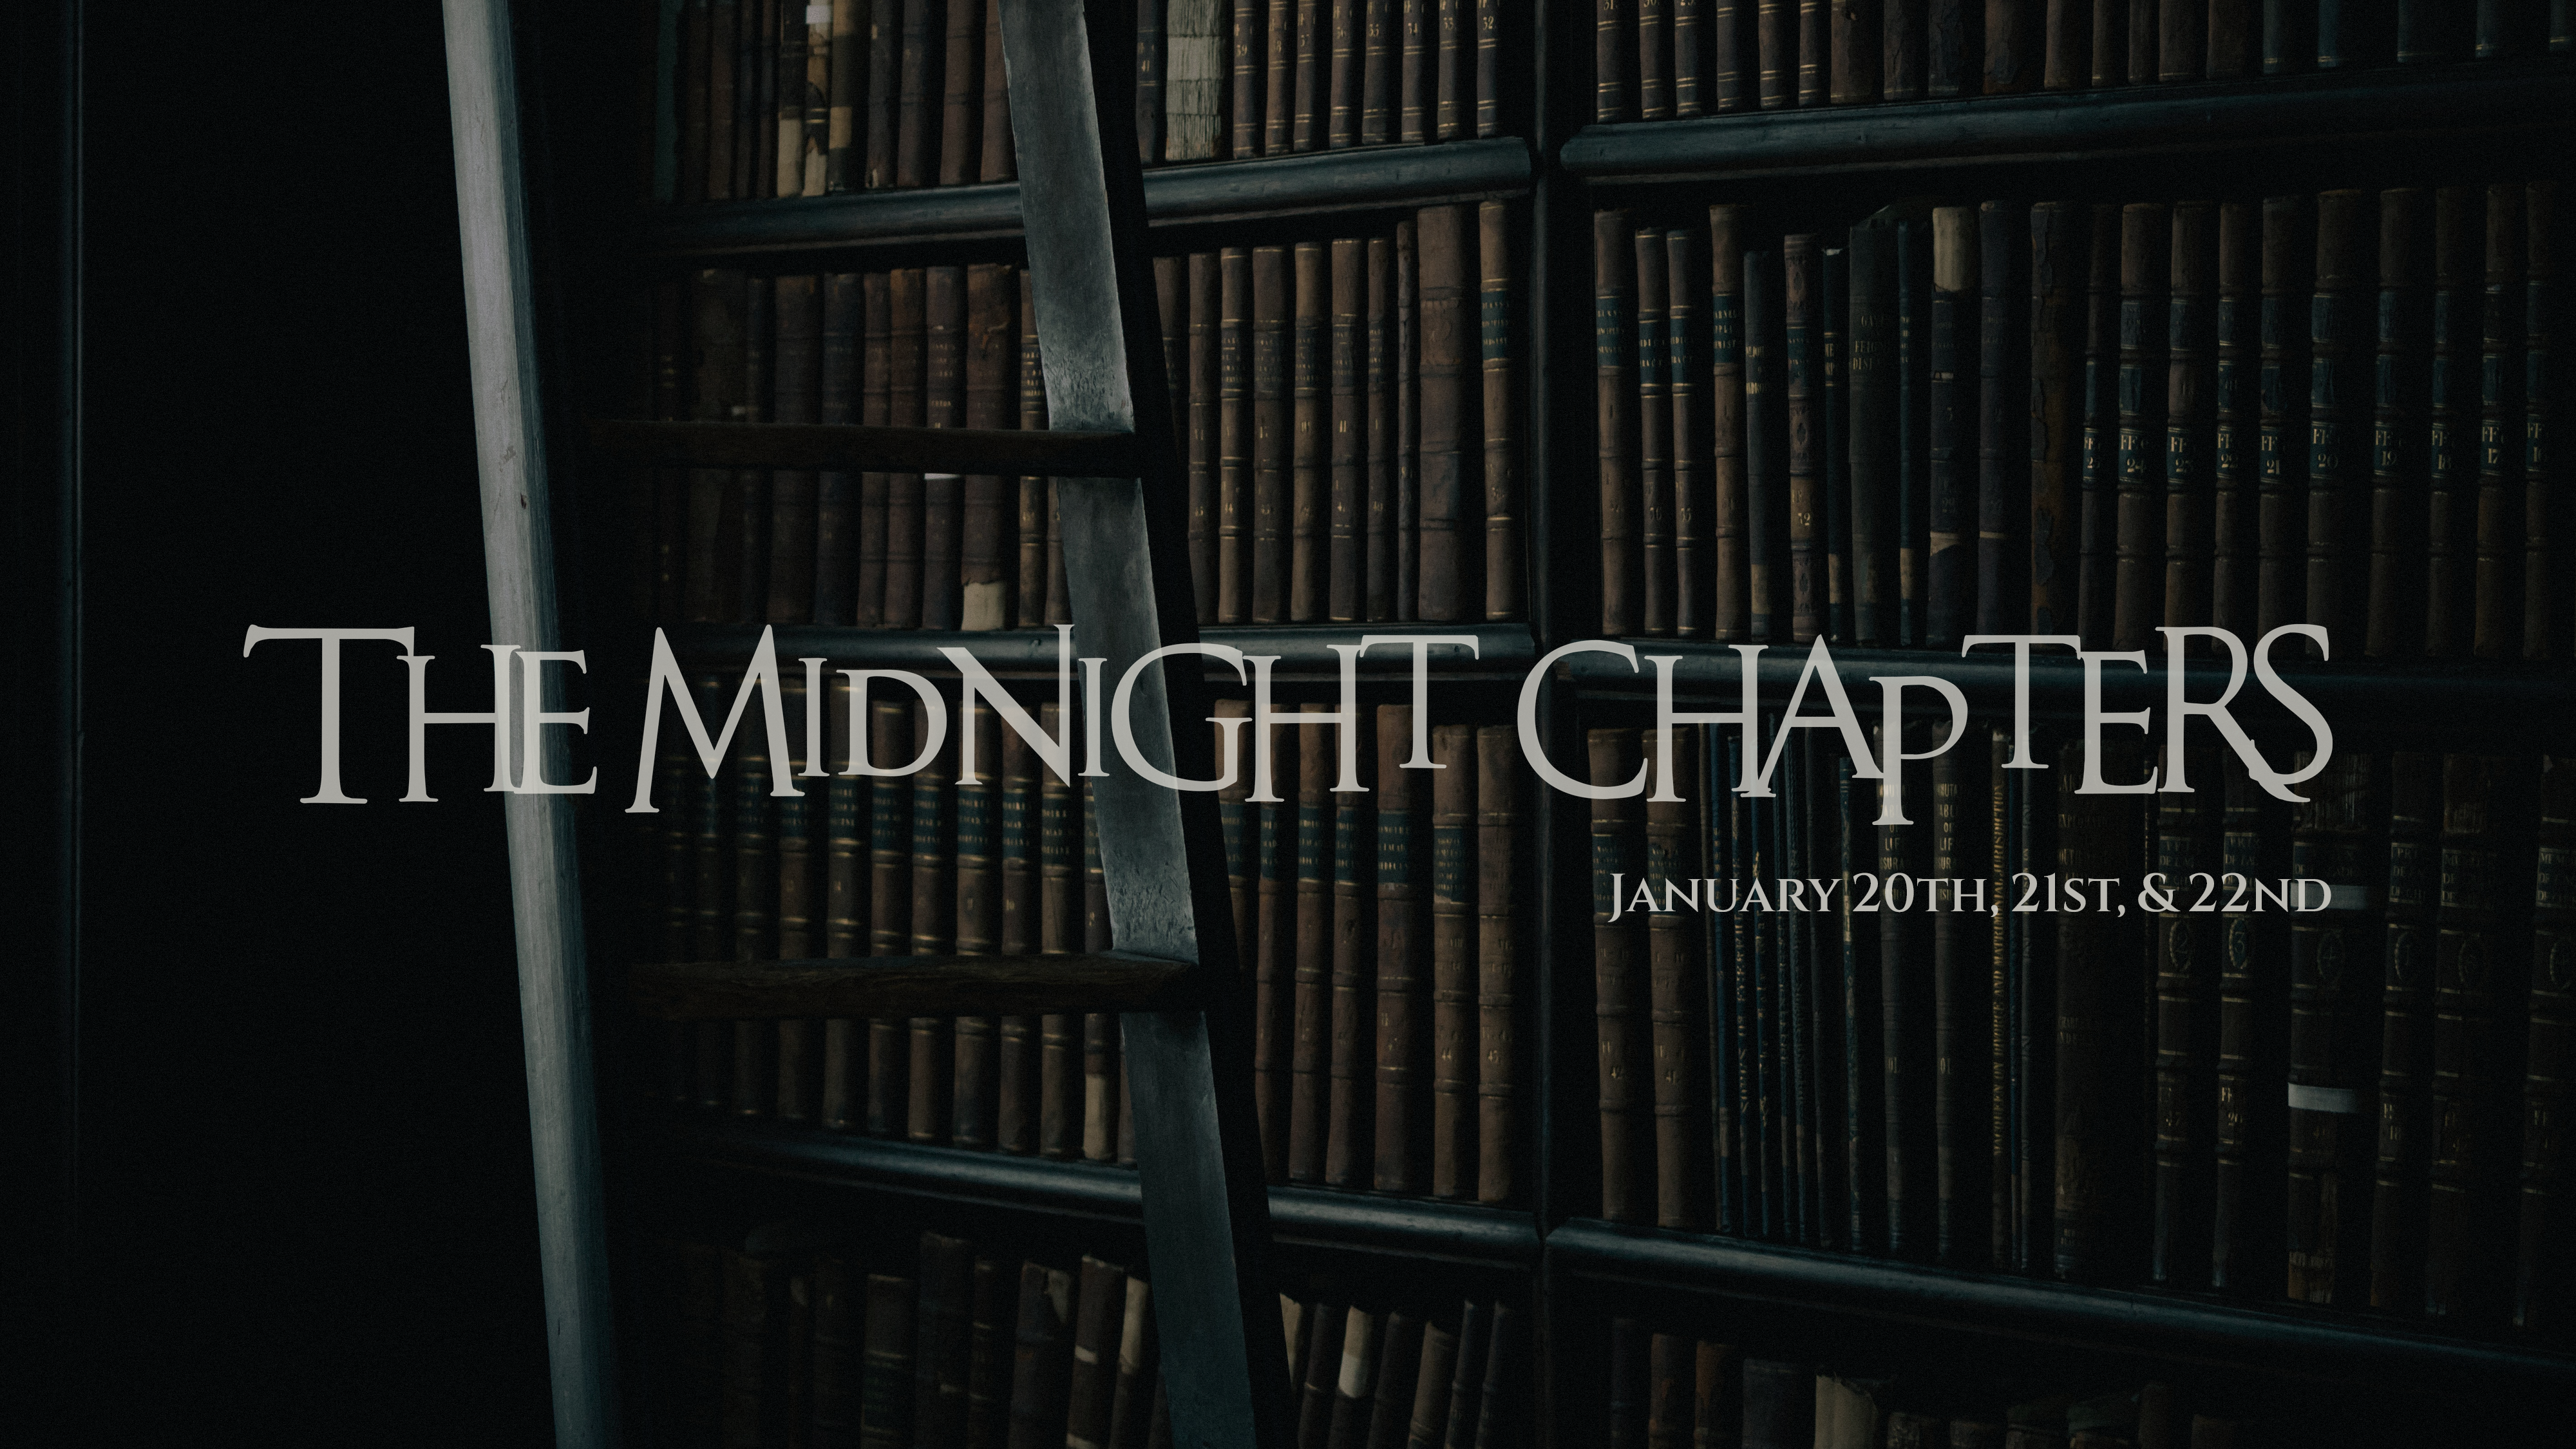 Image for The Midnight Chapters. A bookshelf lines the background of the image, while the words The Midnight Chapters is in the center of the image in the foreground, in a gothic font.